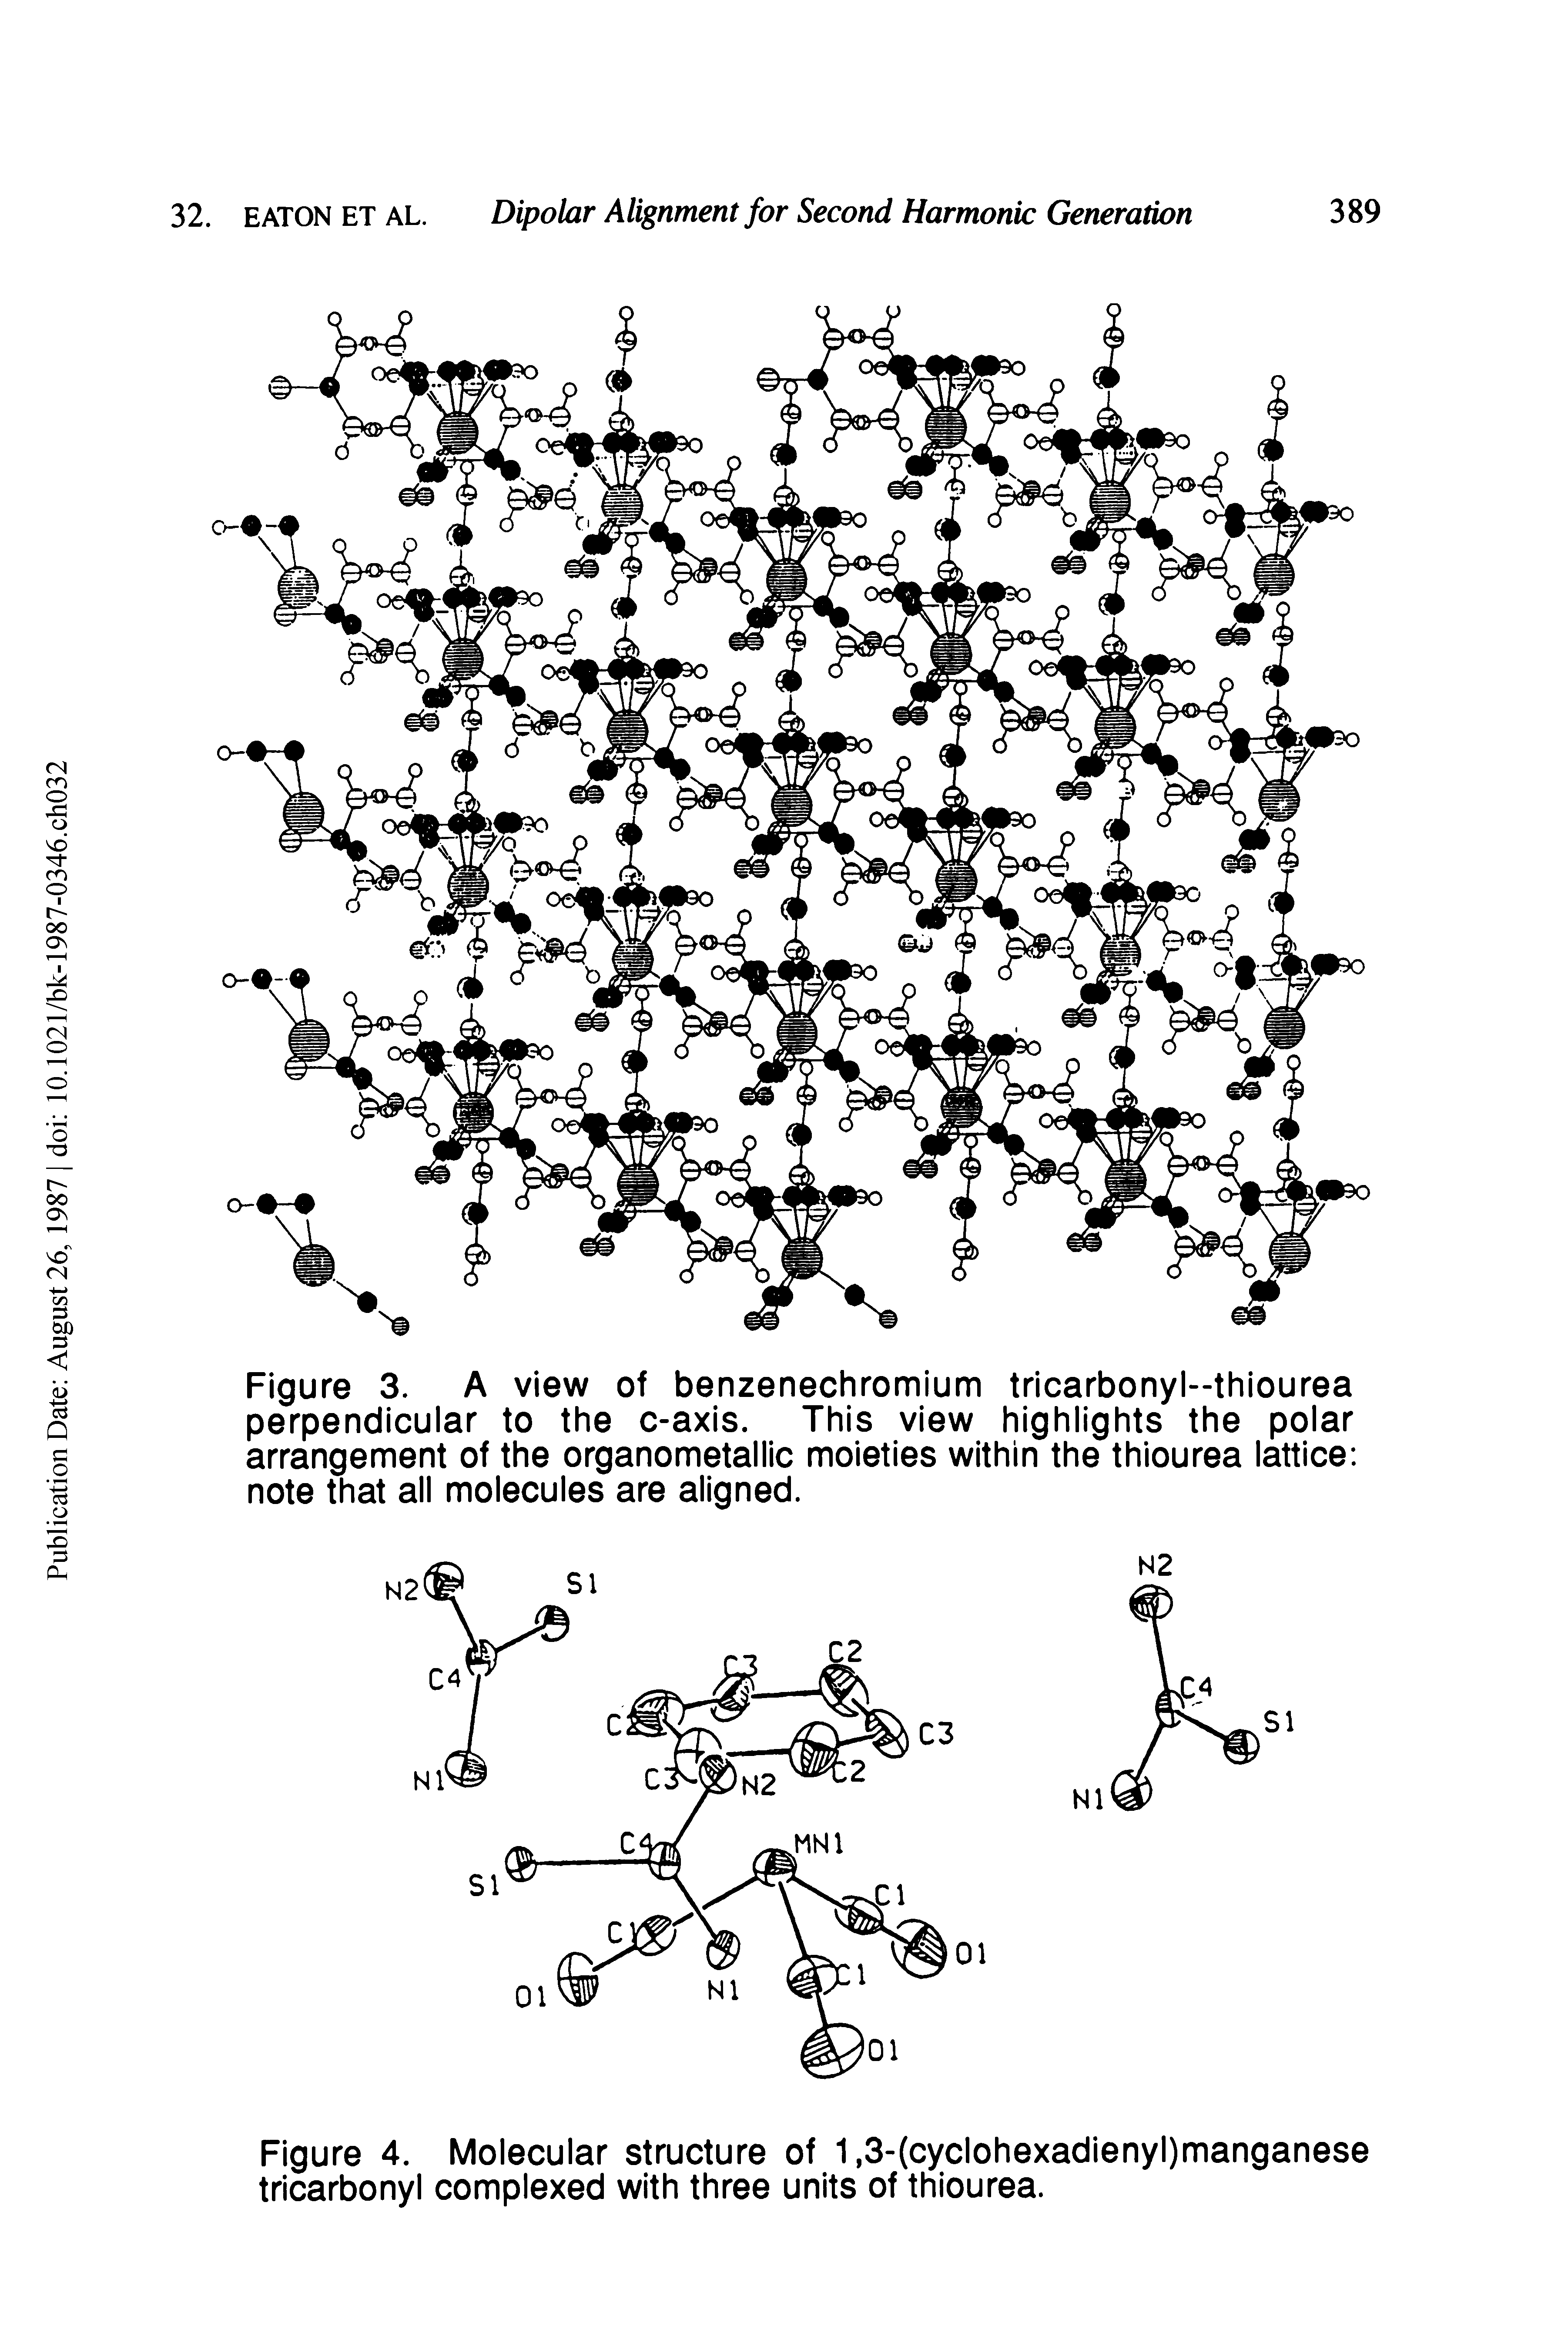 Figure 4. Molecular structure of 1,3- cyclohexadienyl)manganese tricarbonyl complexed with three units of thiourea.